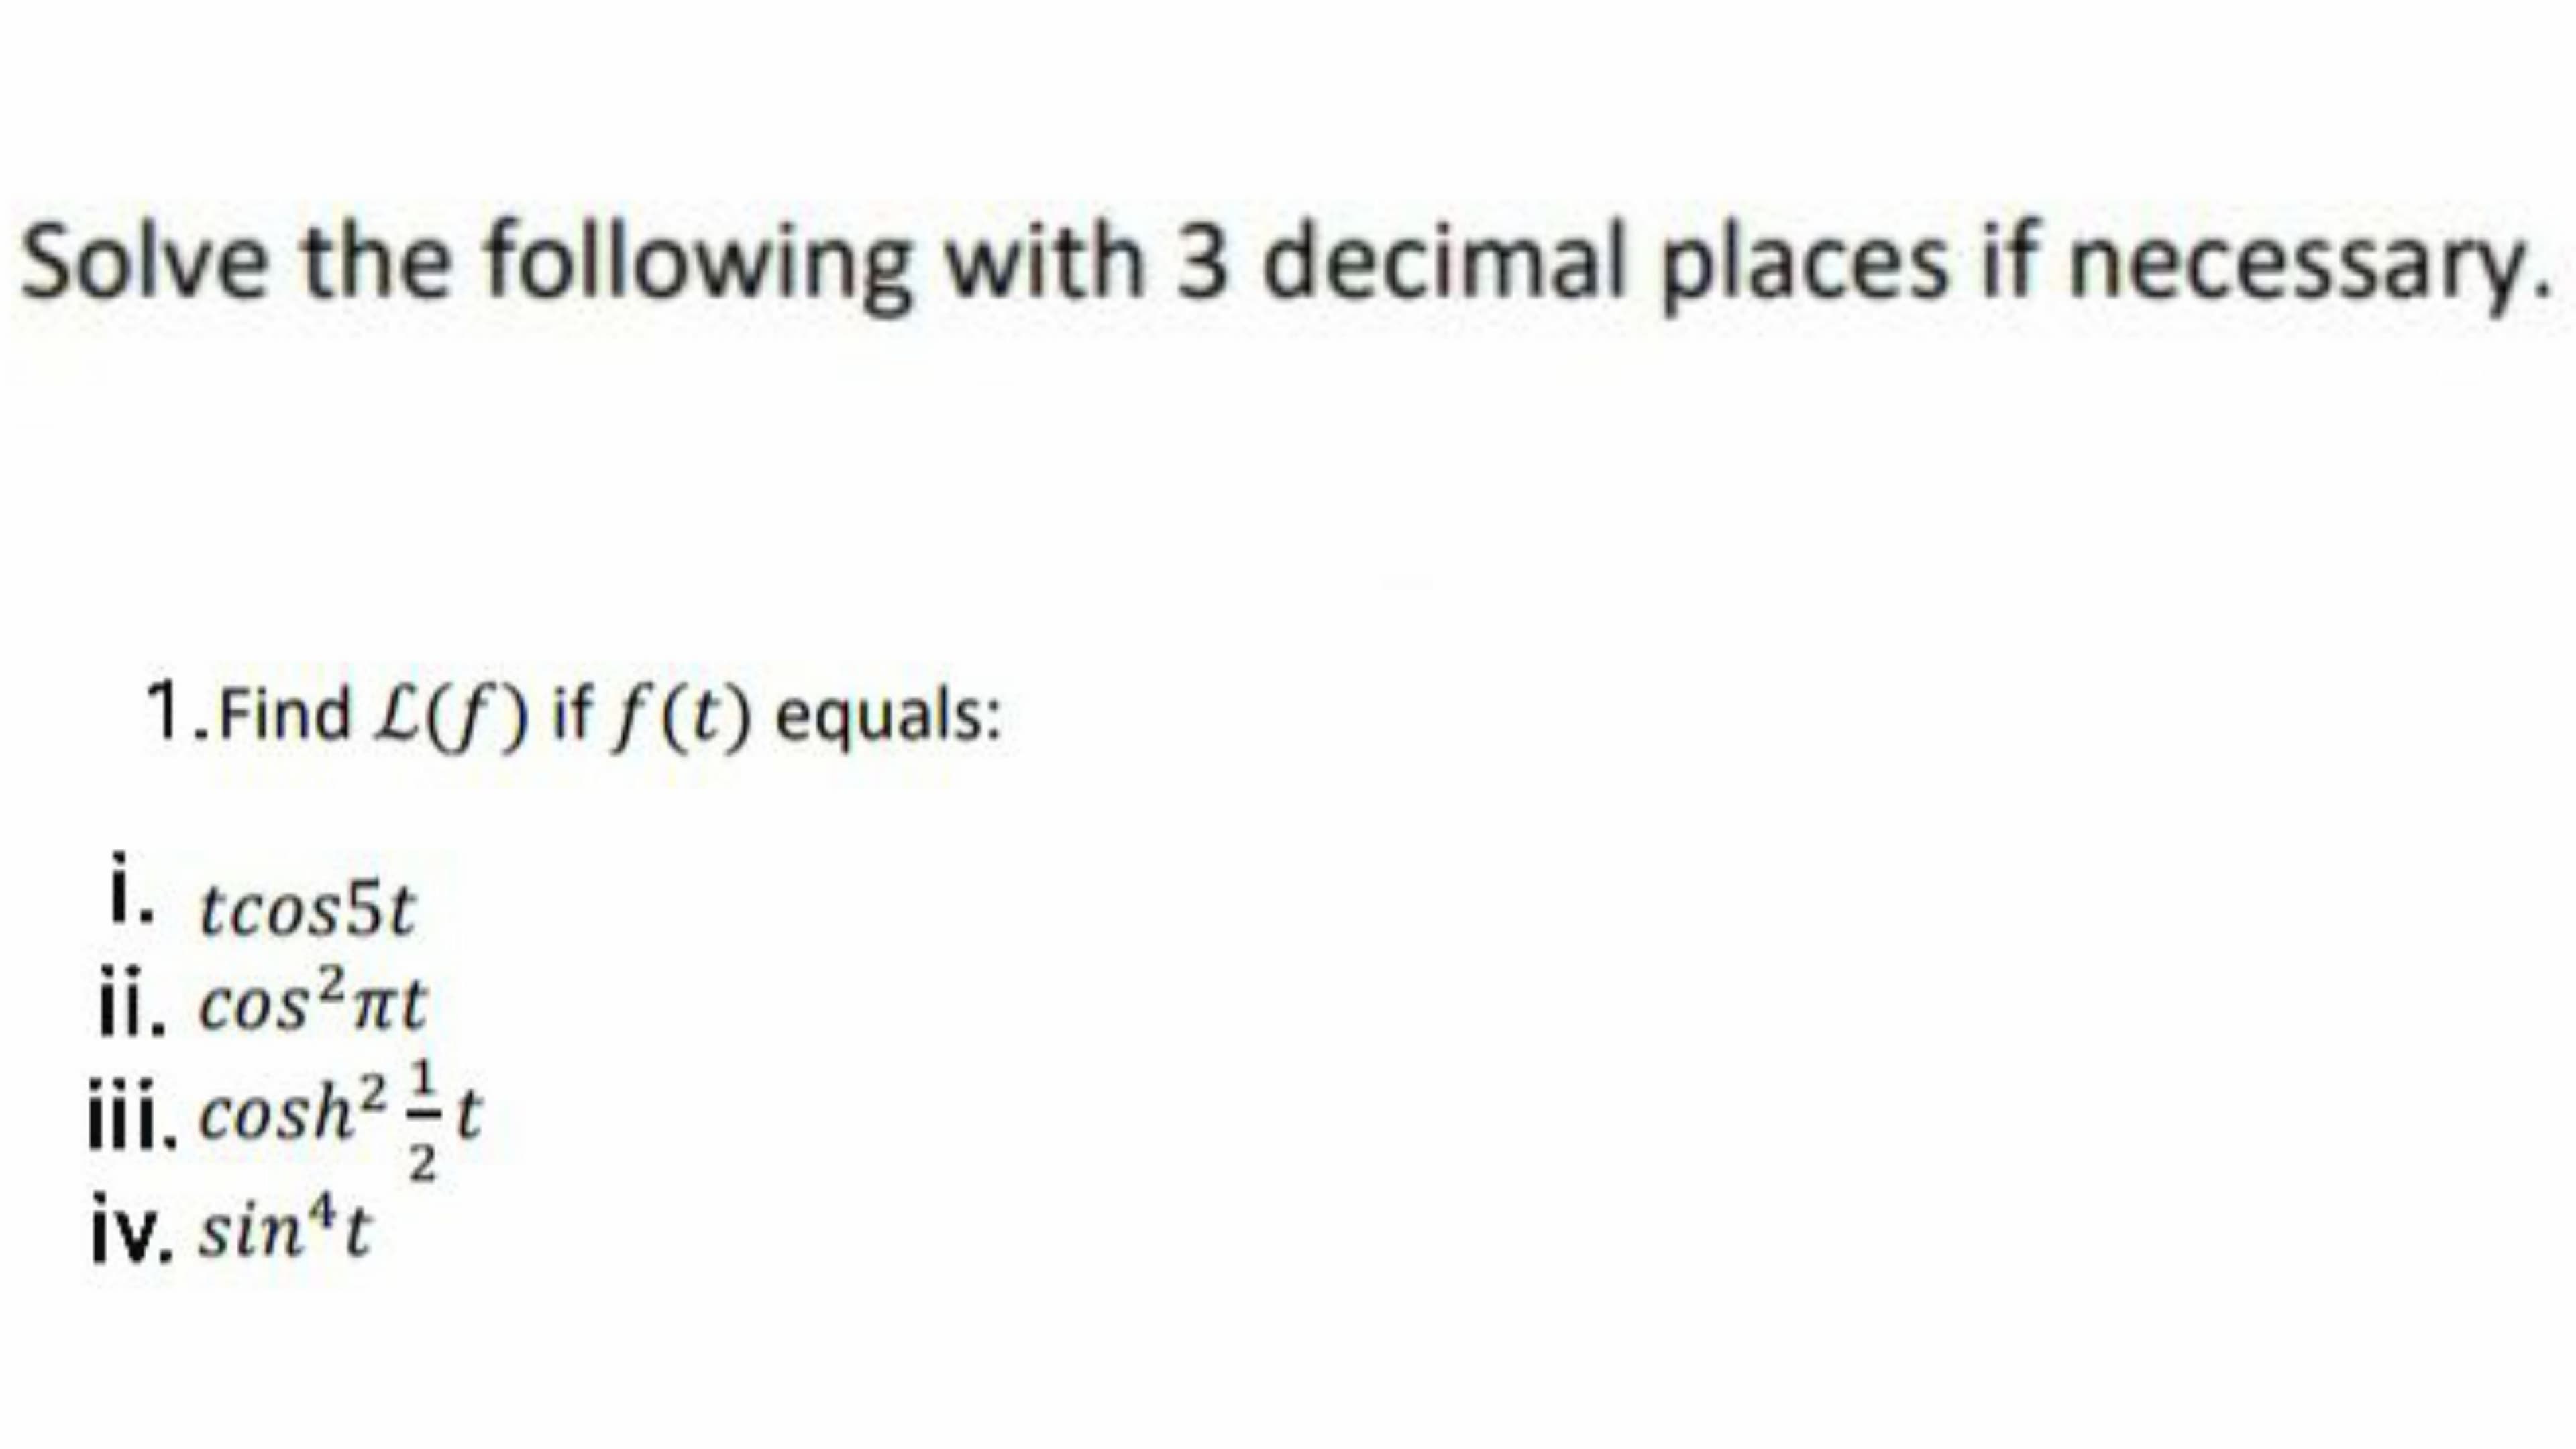 Solve the following with 3 decimal places if necessary.
1.Find L(f) if f(t) equals:
i. tcos5t
ii. cos?nt
iii, cosh? t
